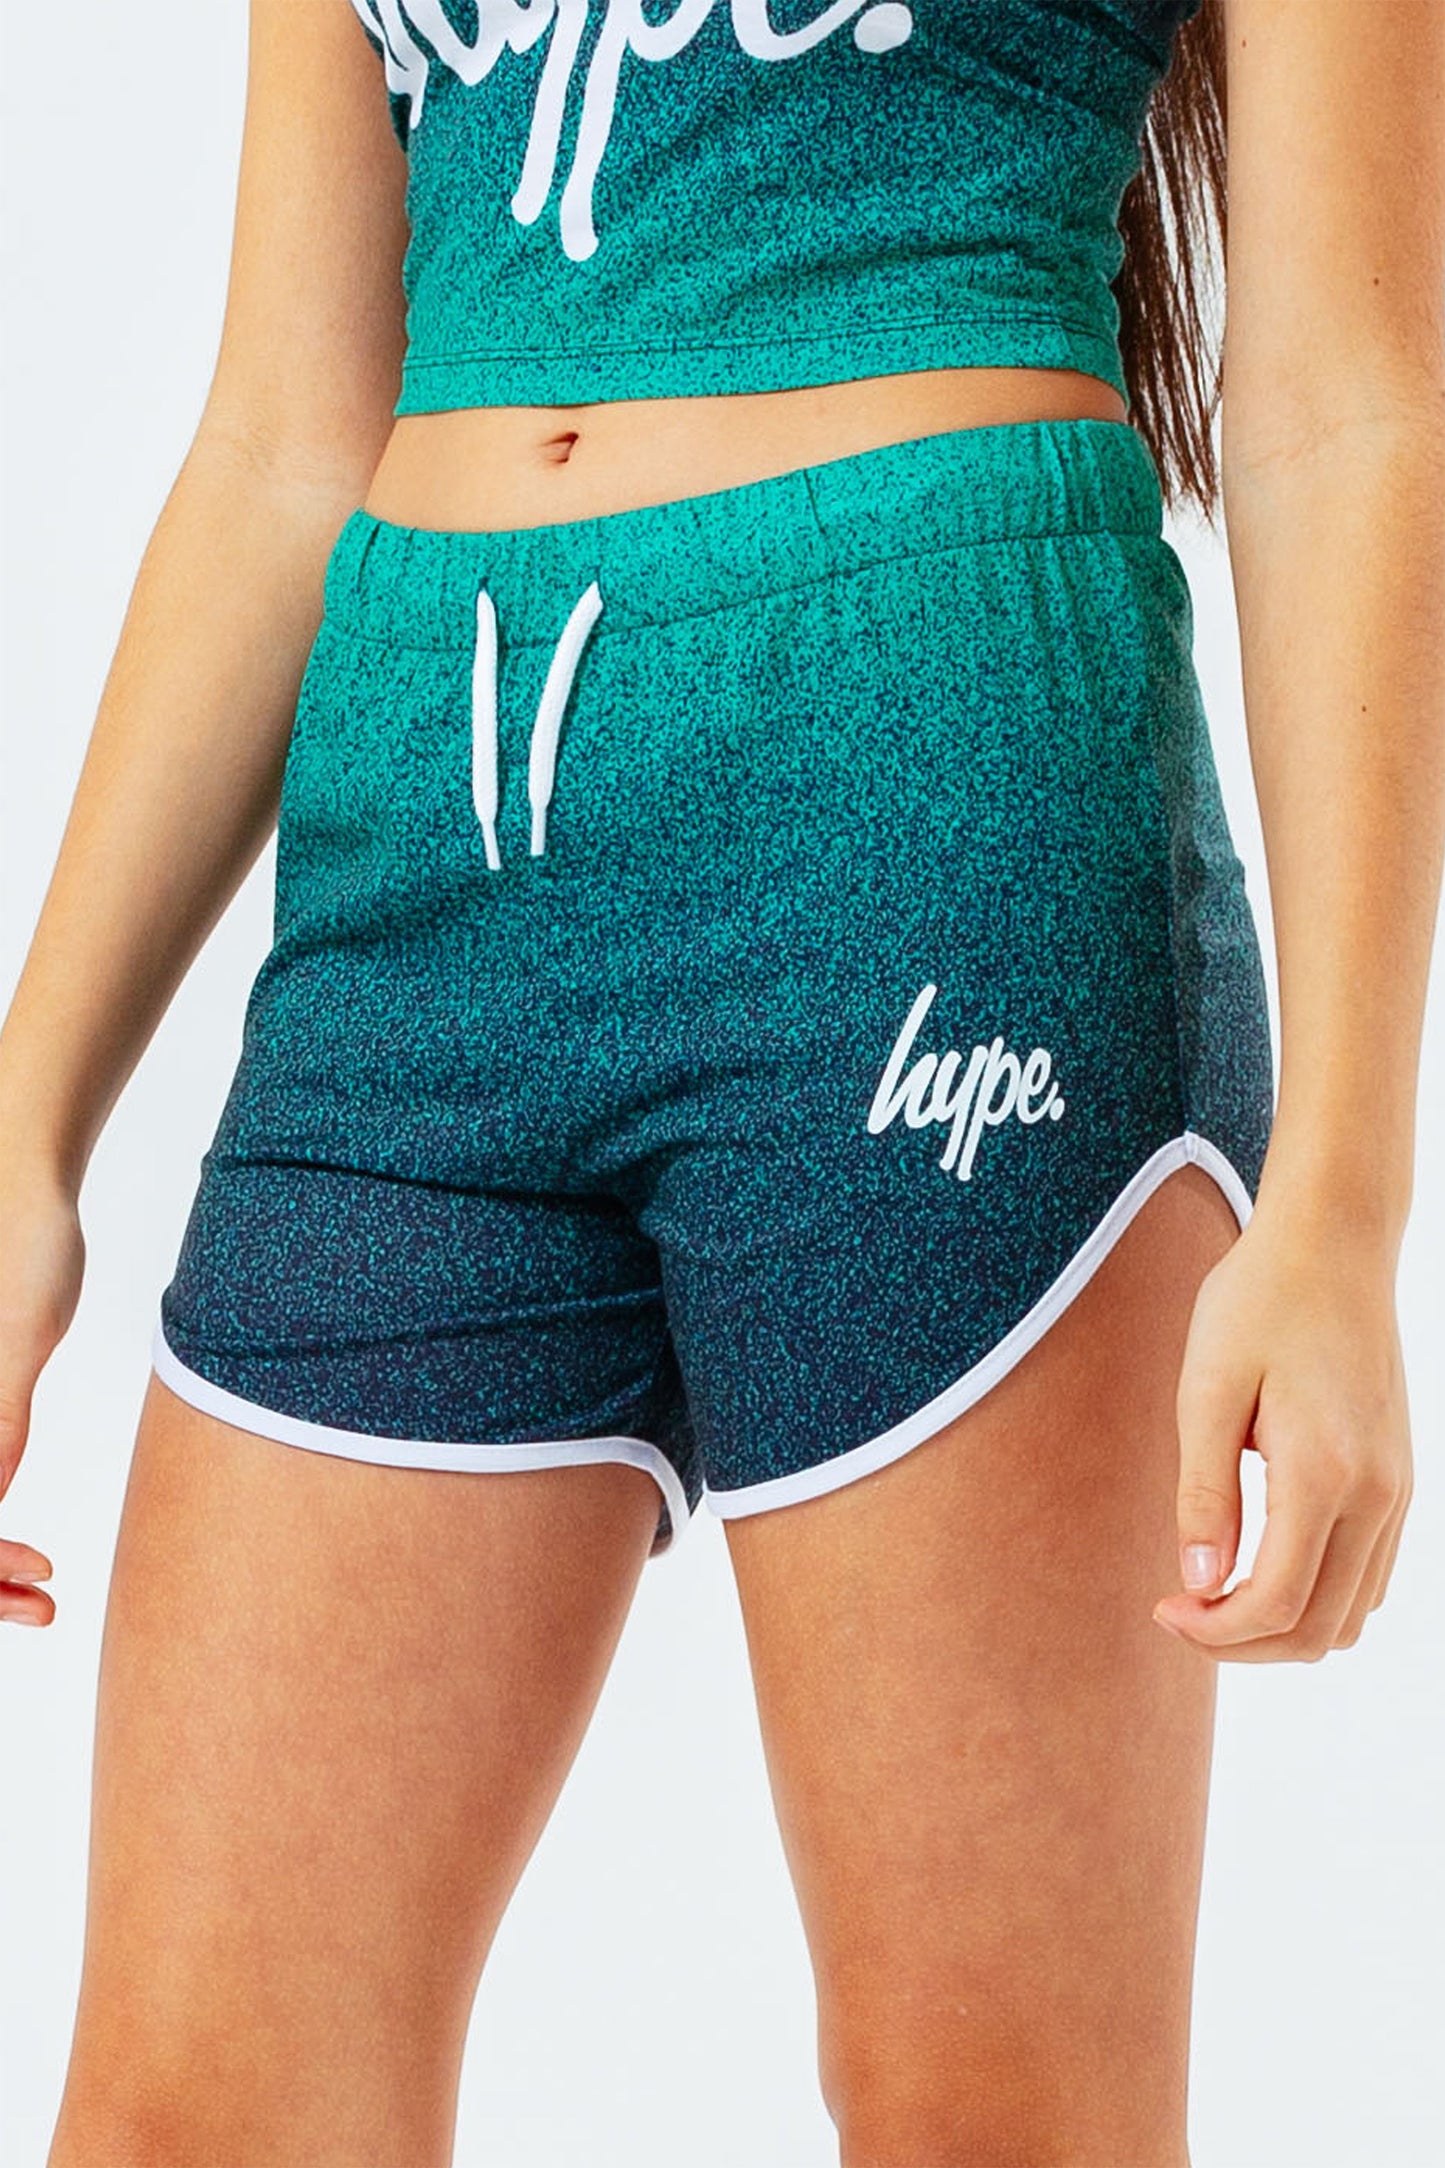 HYPE TEAL SPECKLE FADE KIDS RUNNING SHORTS